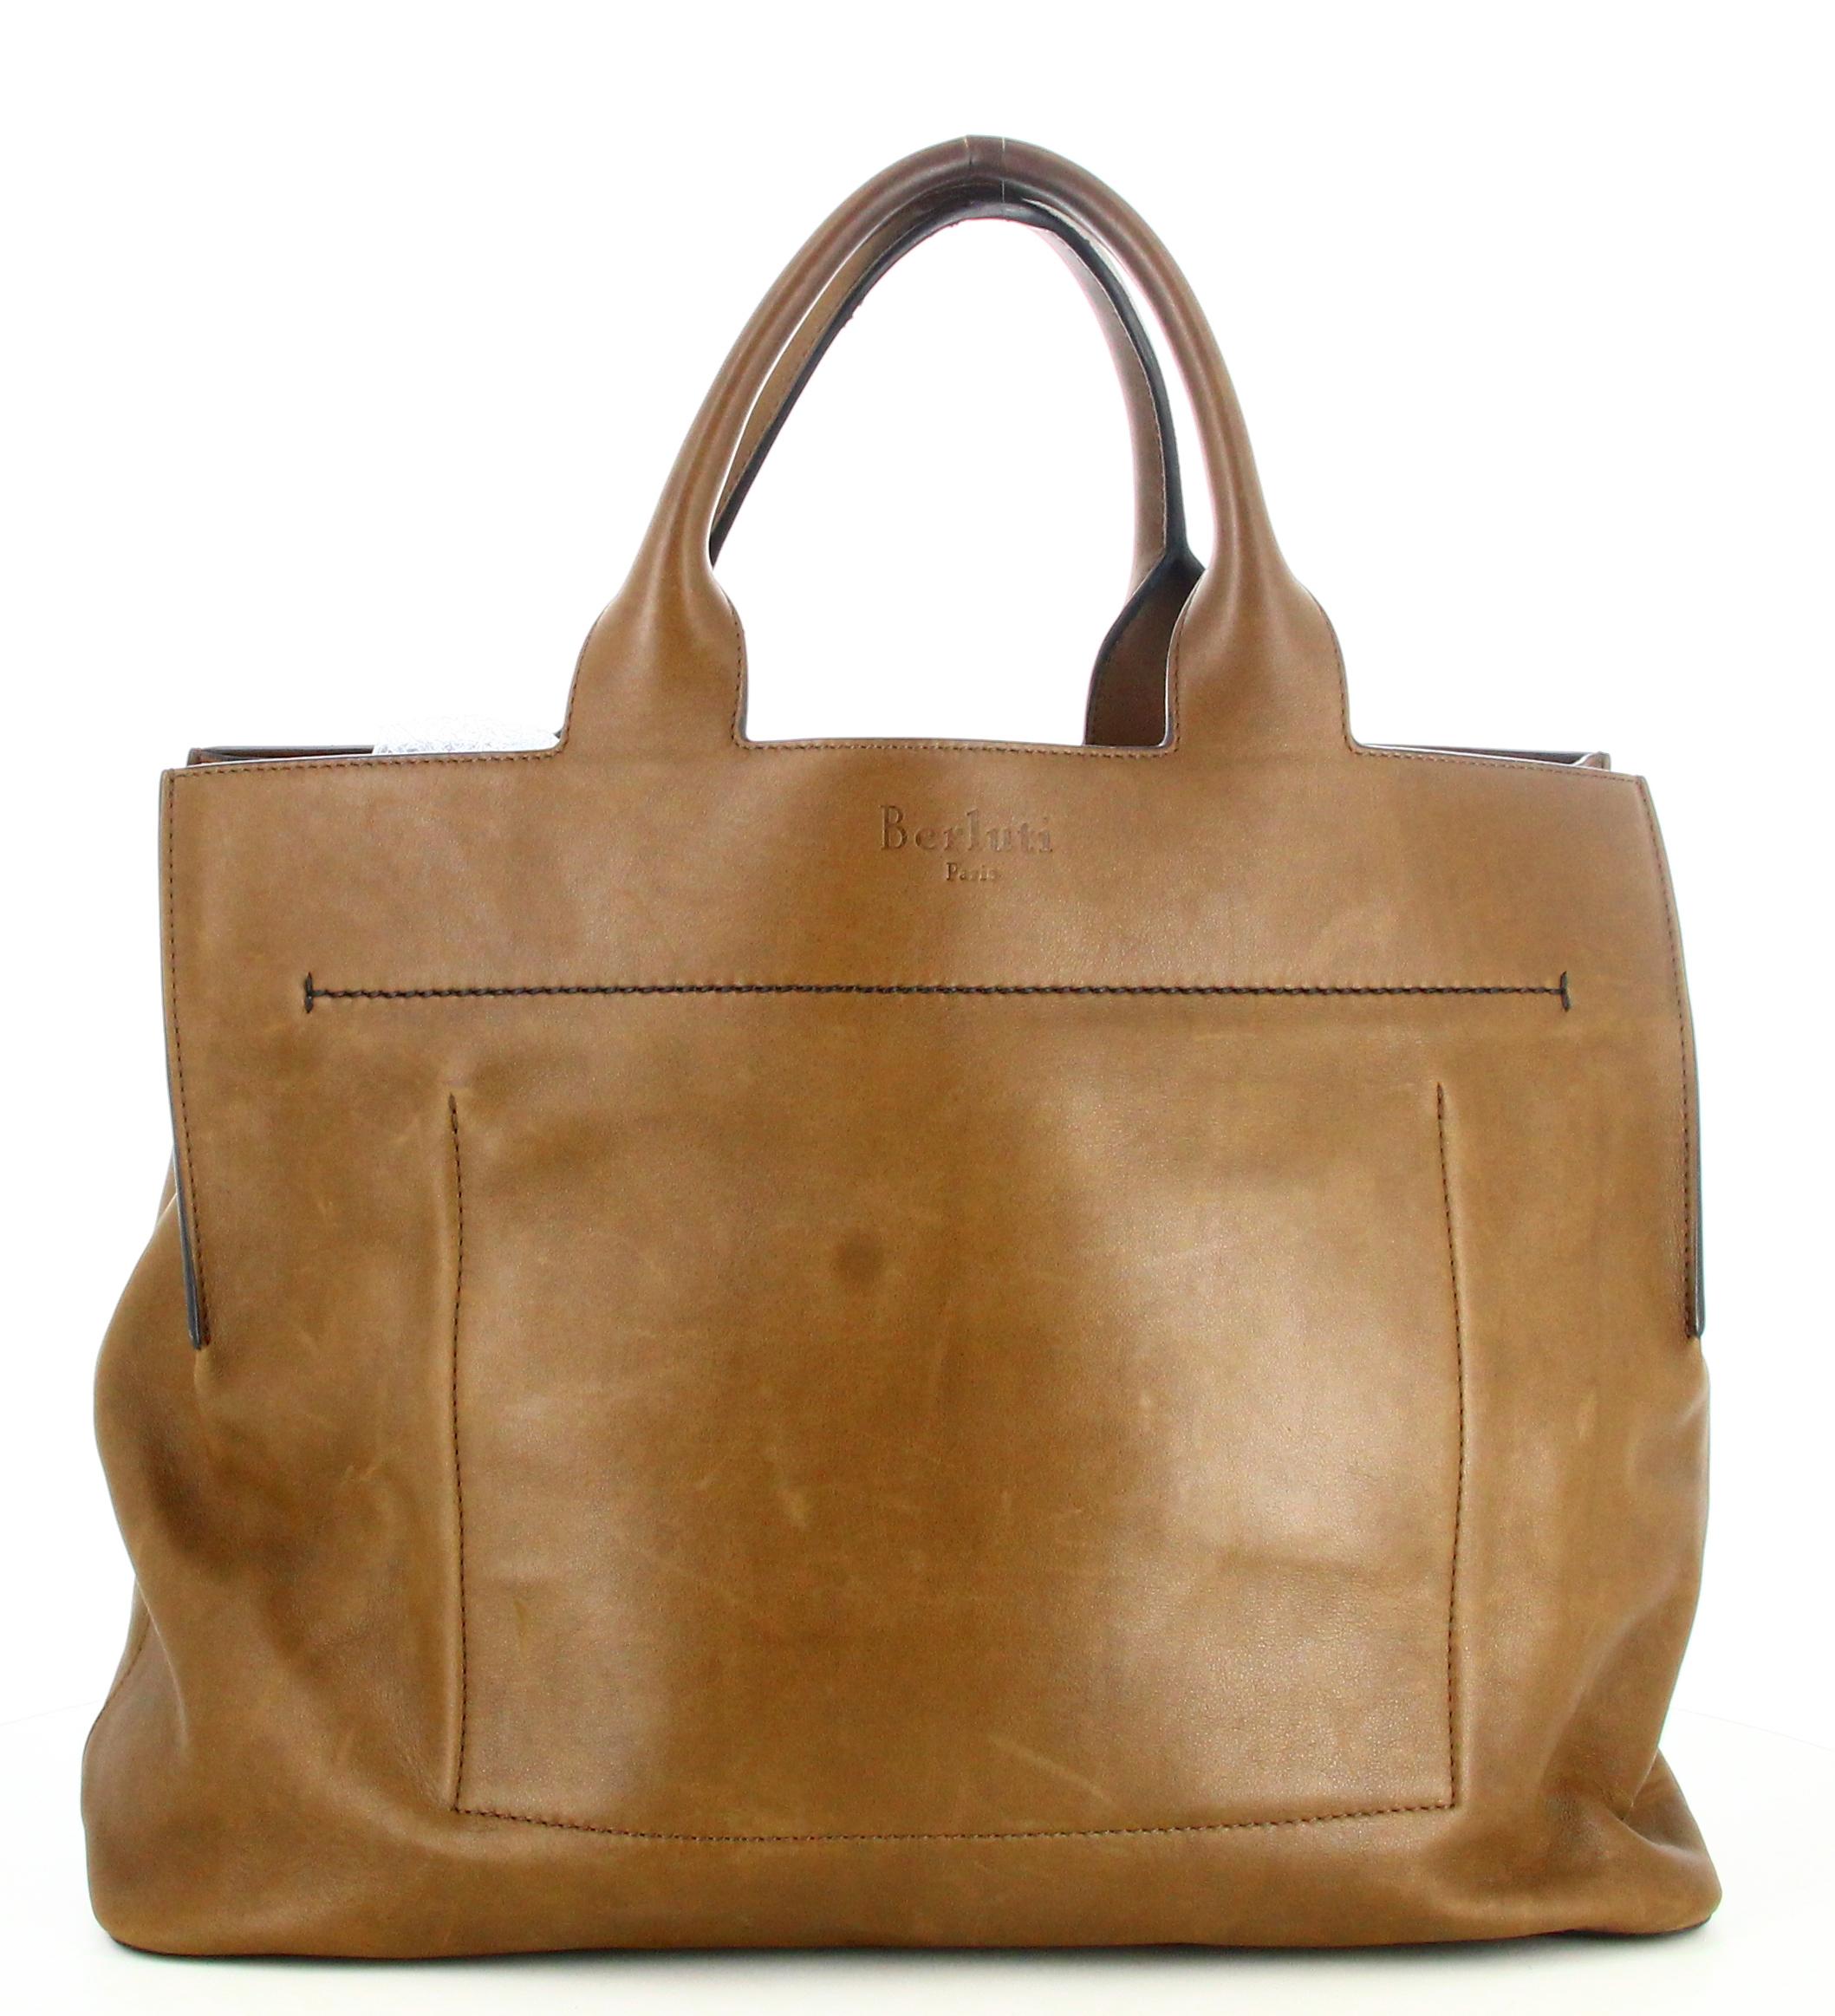 Berluti Khaki Leather Tote Bag 

- Good condition. Shows slight signs of wear over time.
- Tote Bag Berluti 
- Khaki leather
- two small leather handles 
- Inside: pocket